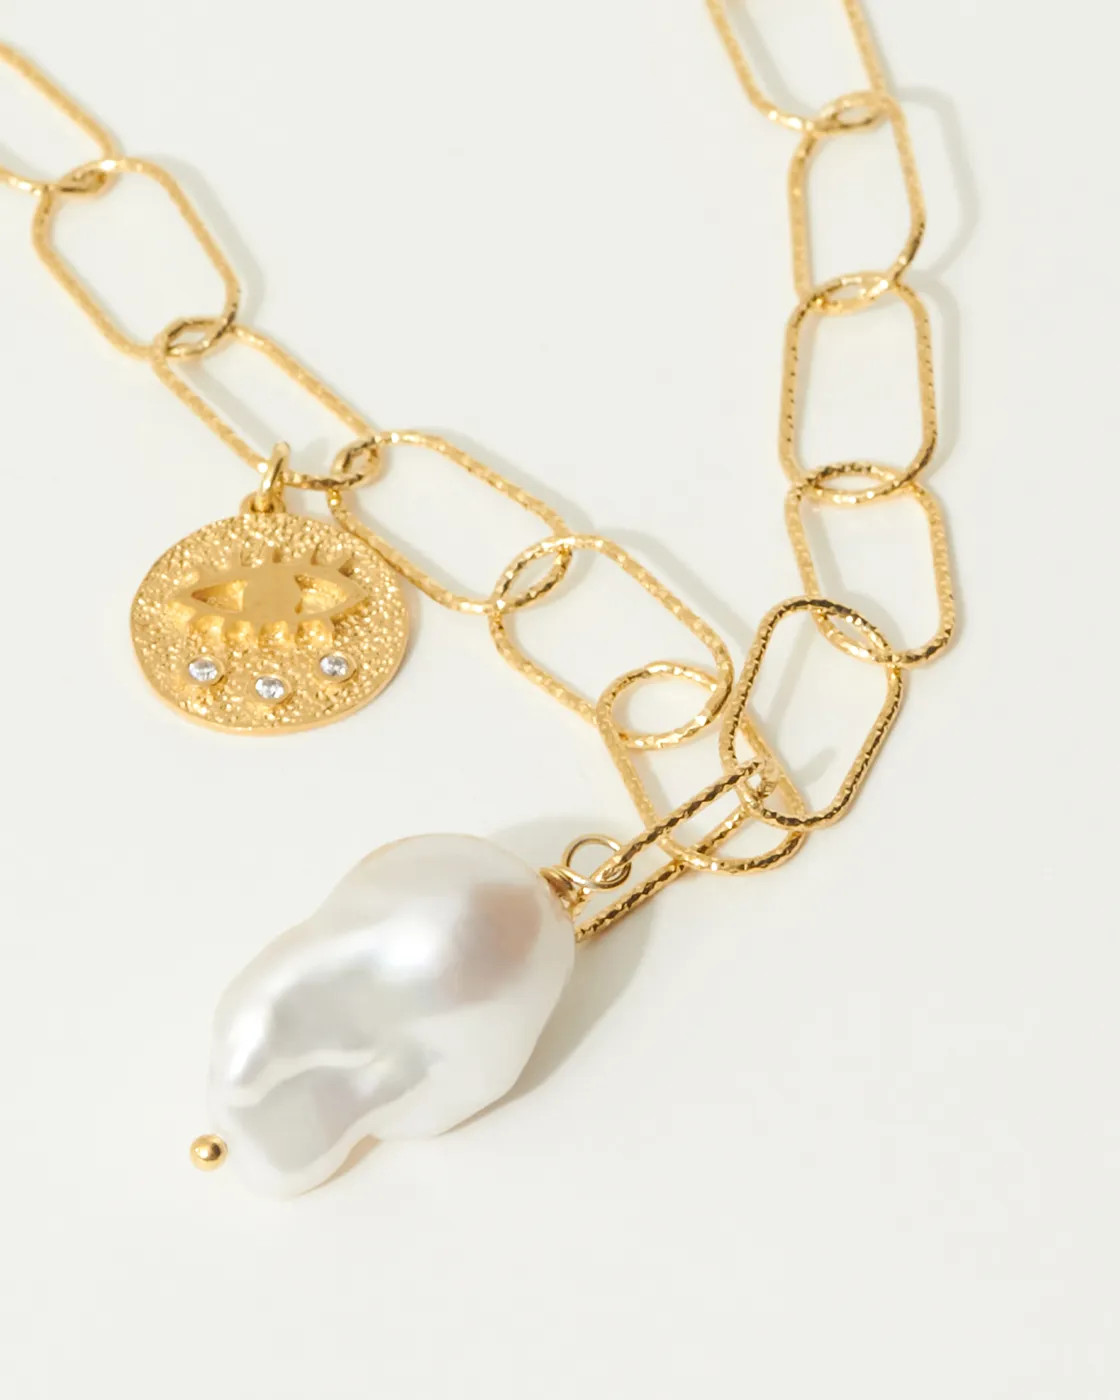 Chunky Gold-Plated Sterling Silver Necklace with Pearl